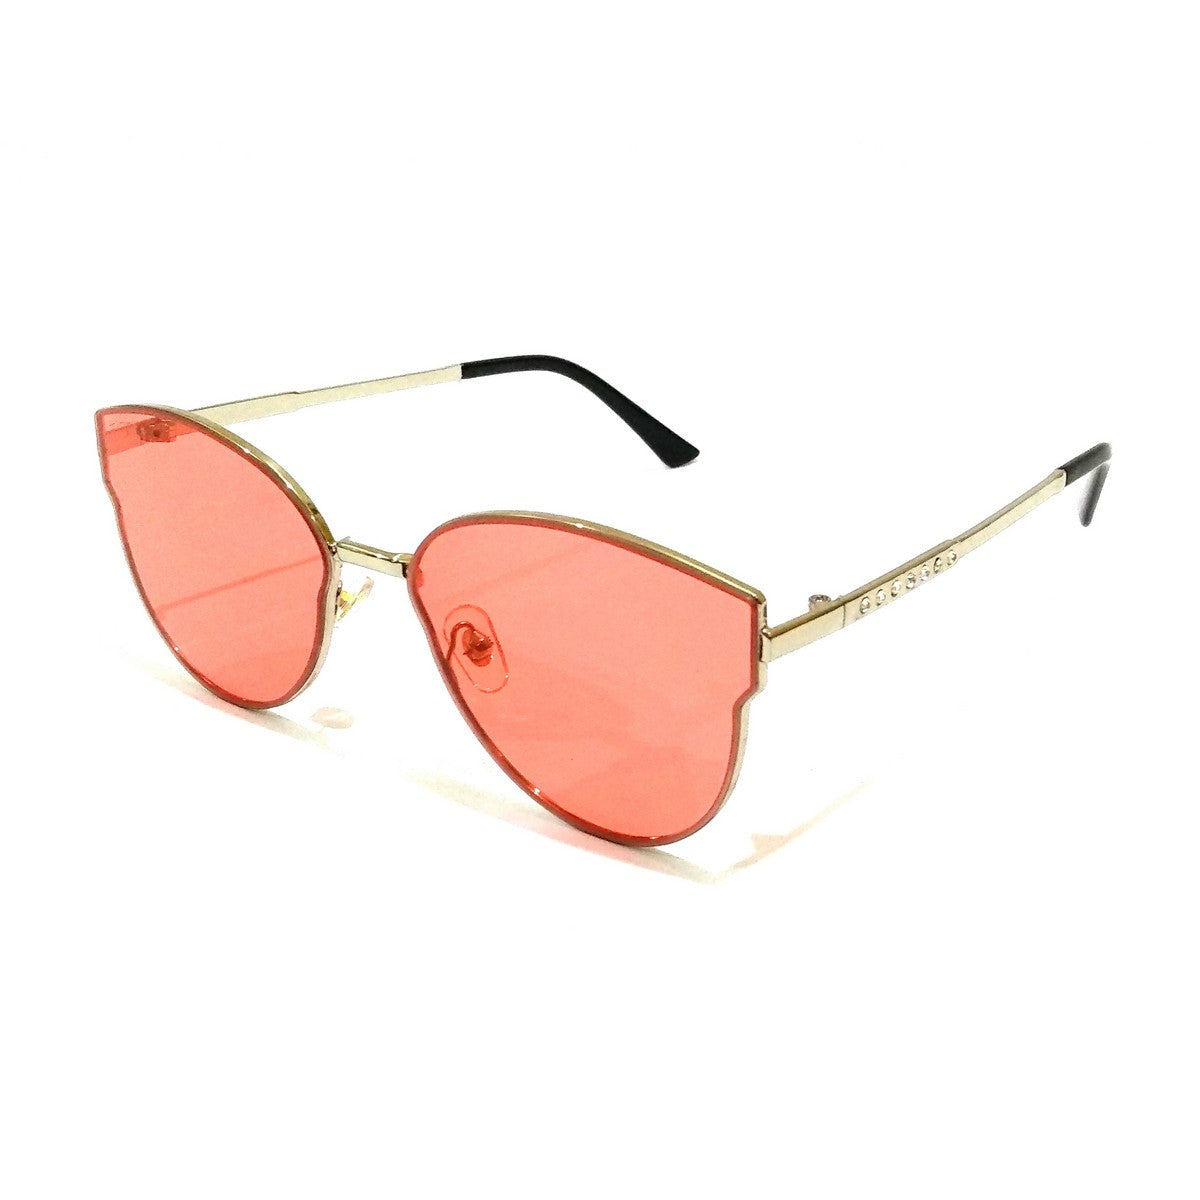 Round Sunglasses: Buy Round Sunglasses Online at Best Prices in India |  Snapdeal